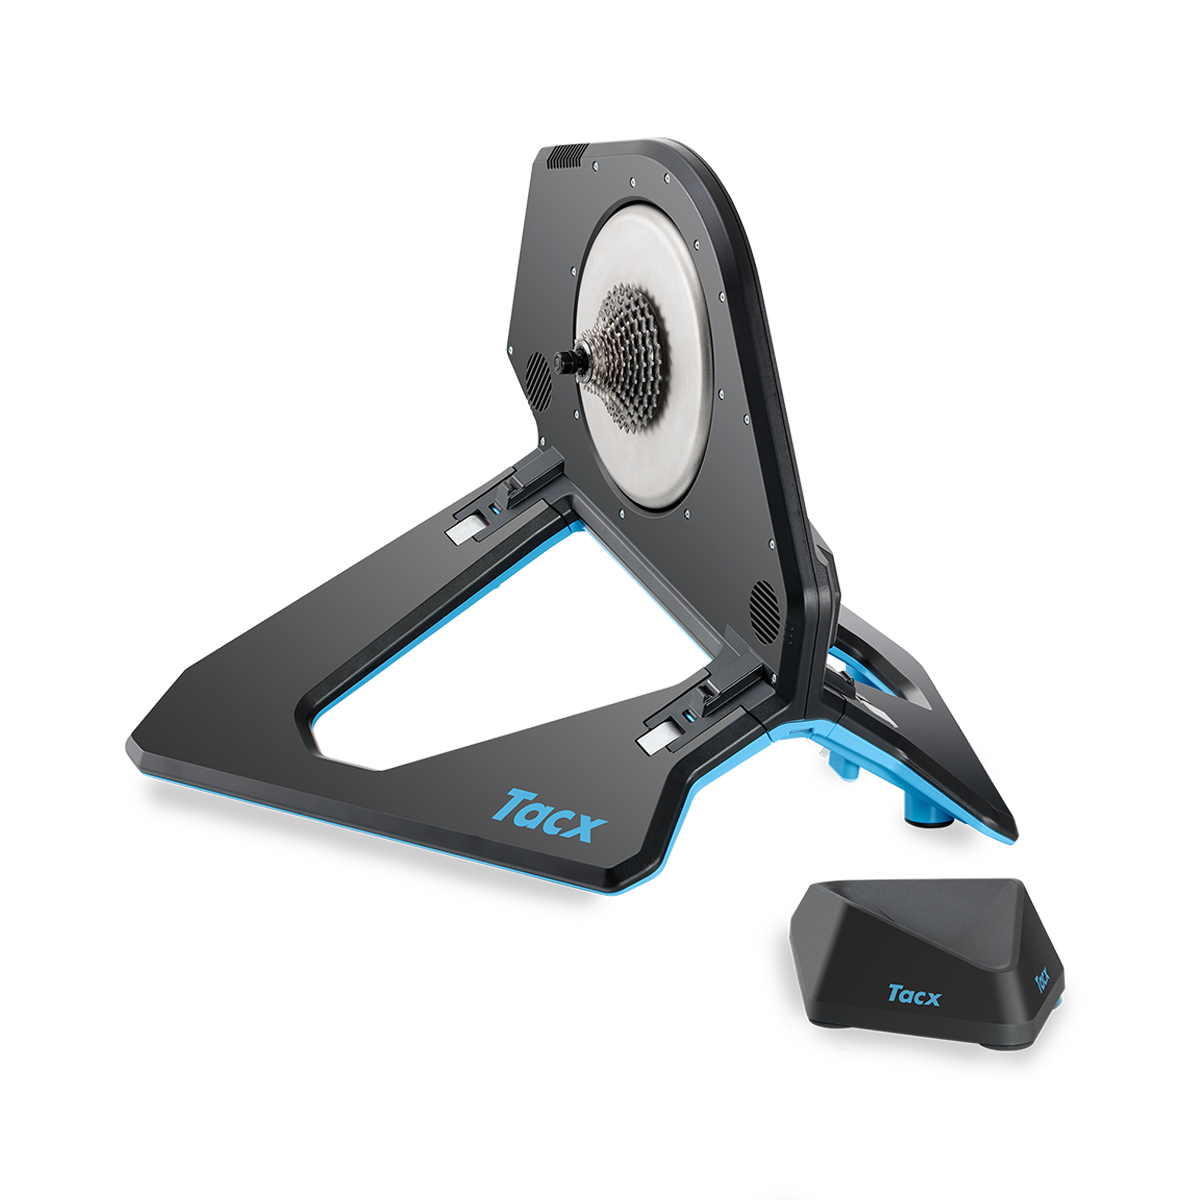 Tacx NEO 2T Smart Trainer